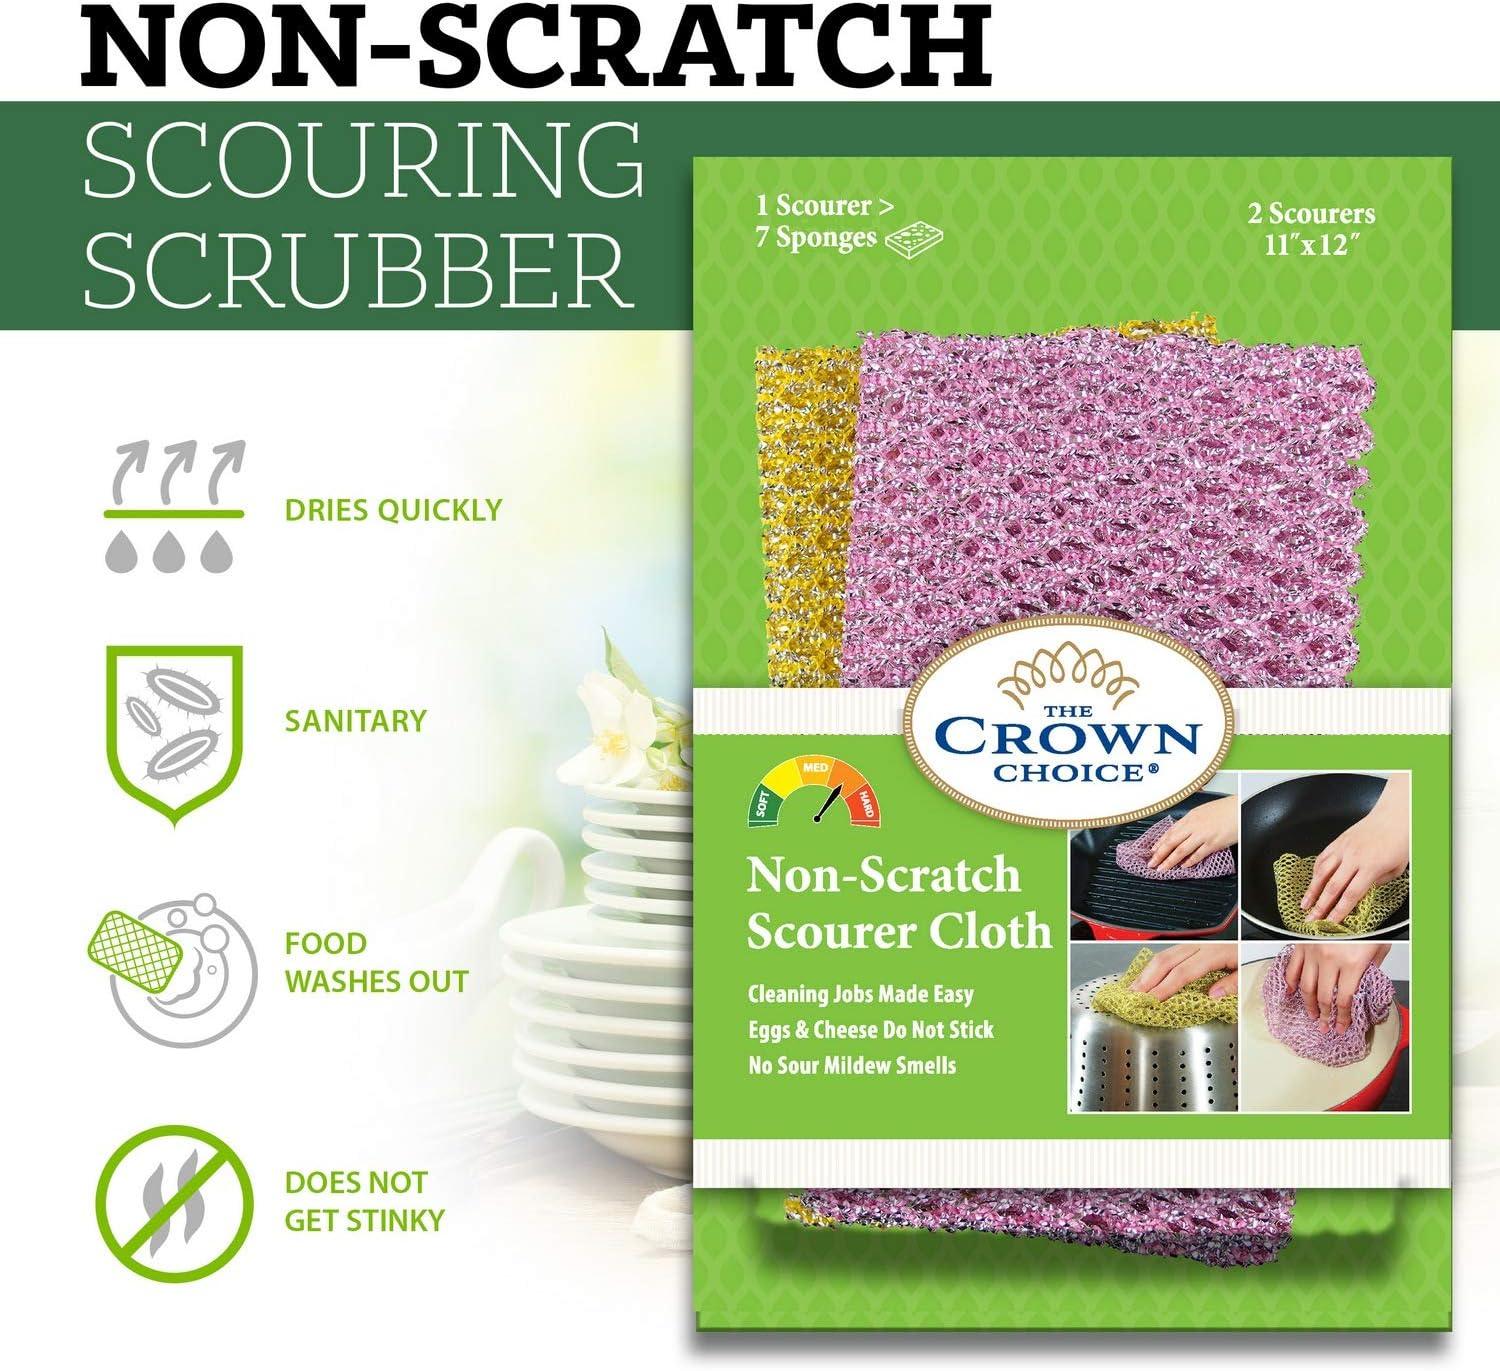 Dish Scrubbers for Cleaning Dishes - Replace Sponges for Dishes - Non  Scratch Scrubbing Cloth for Washing Dishes - Best Alternative Dishwashing  Scrub